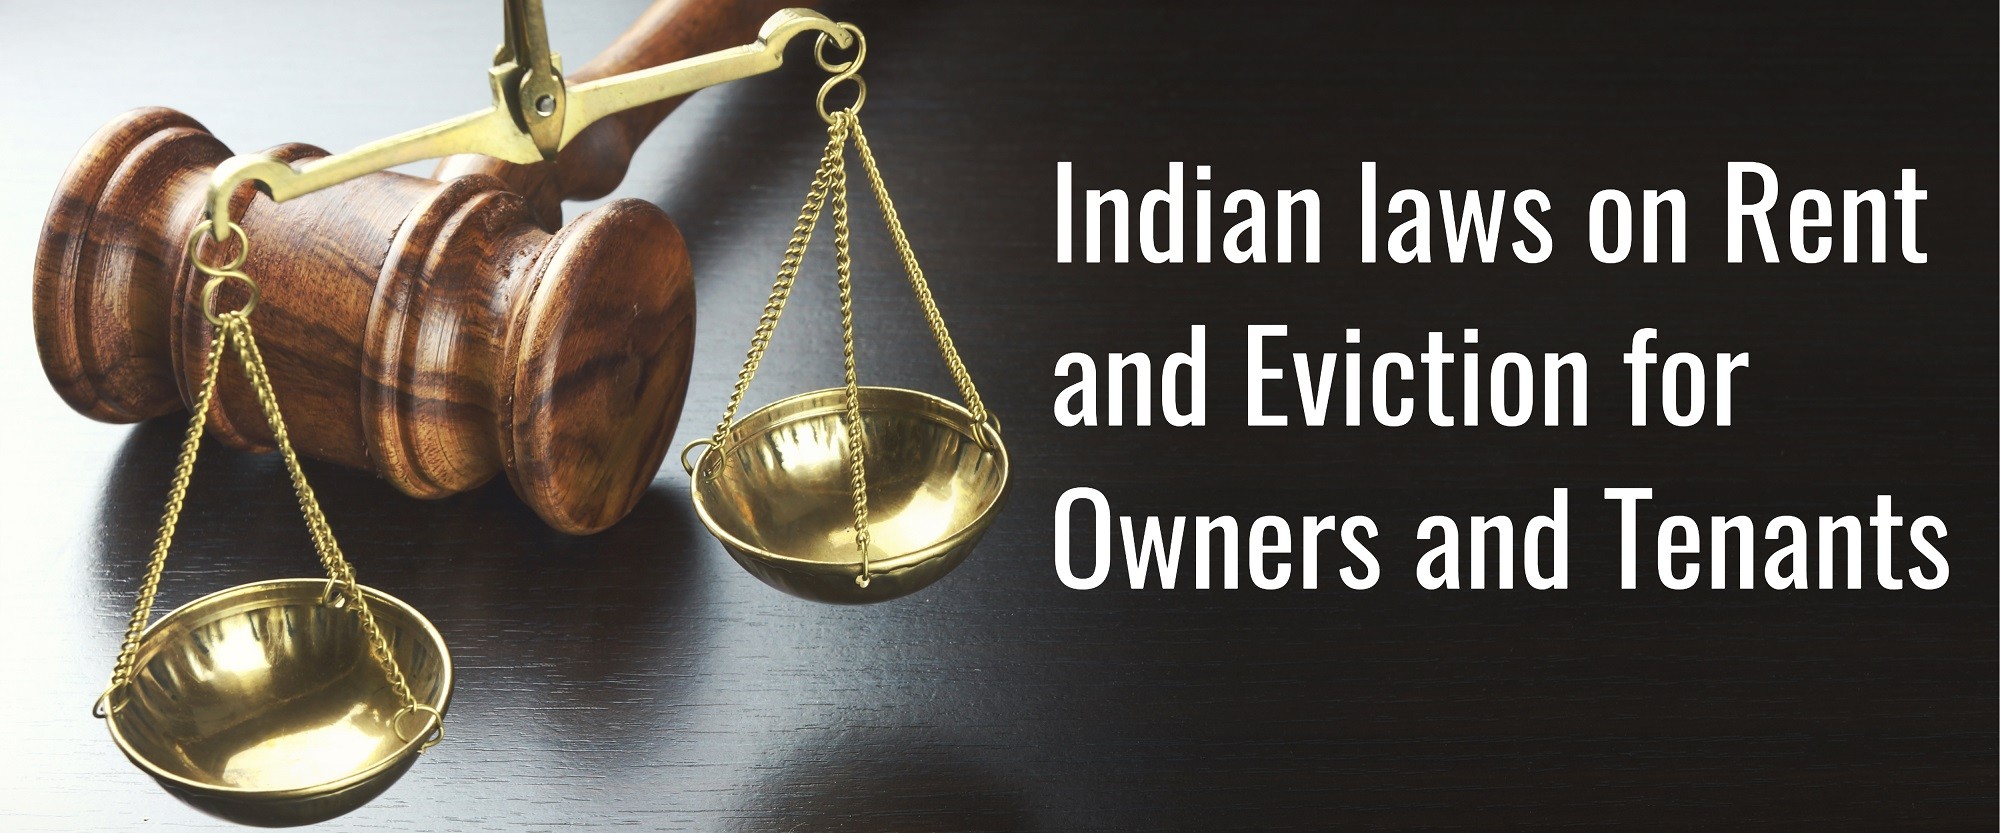 Indian Laws on Rent